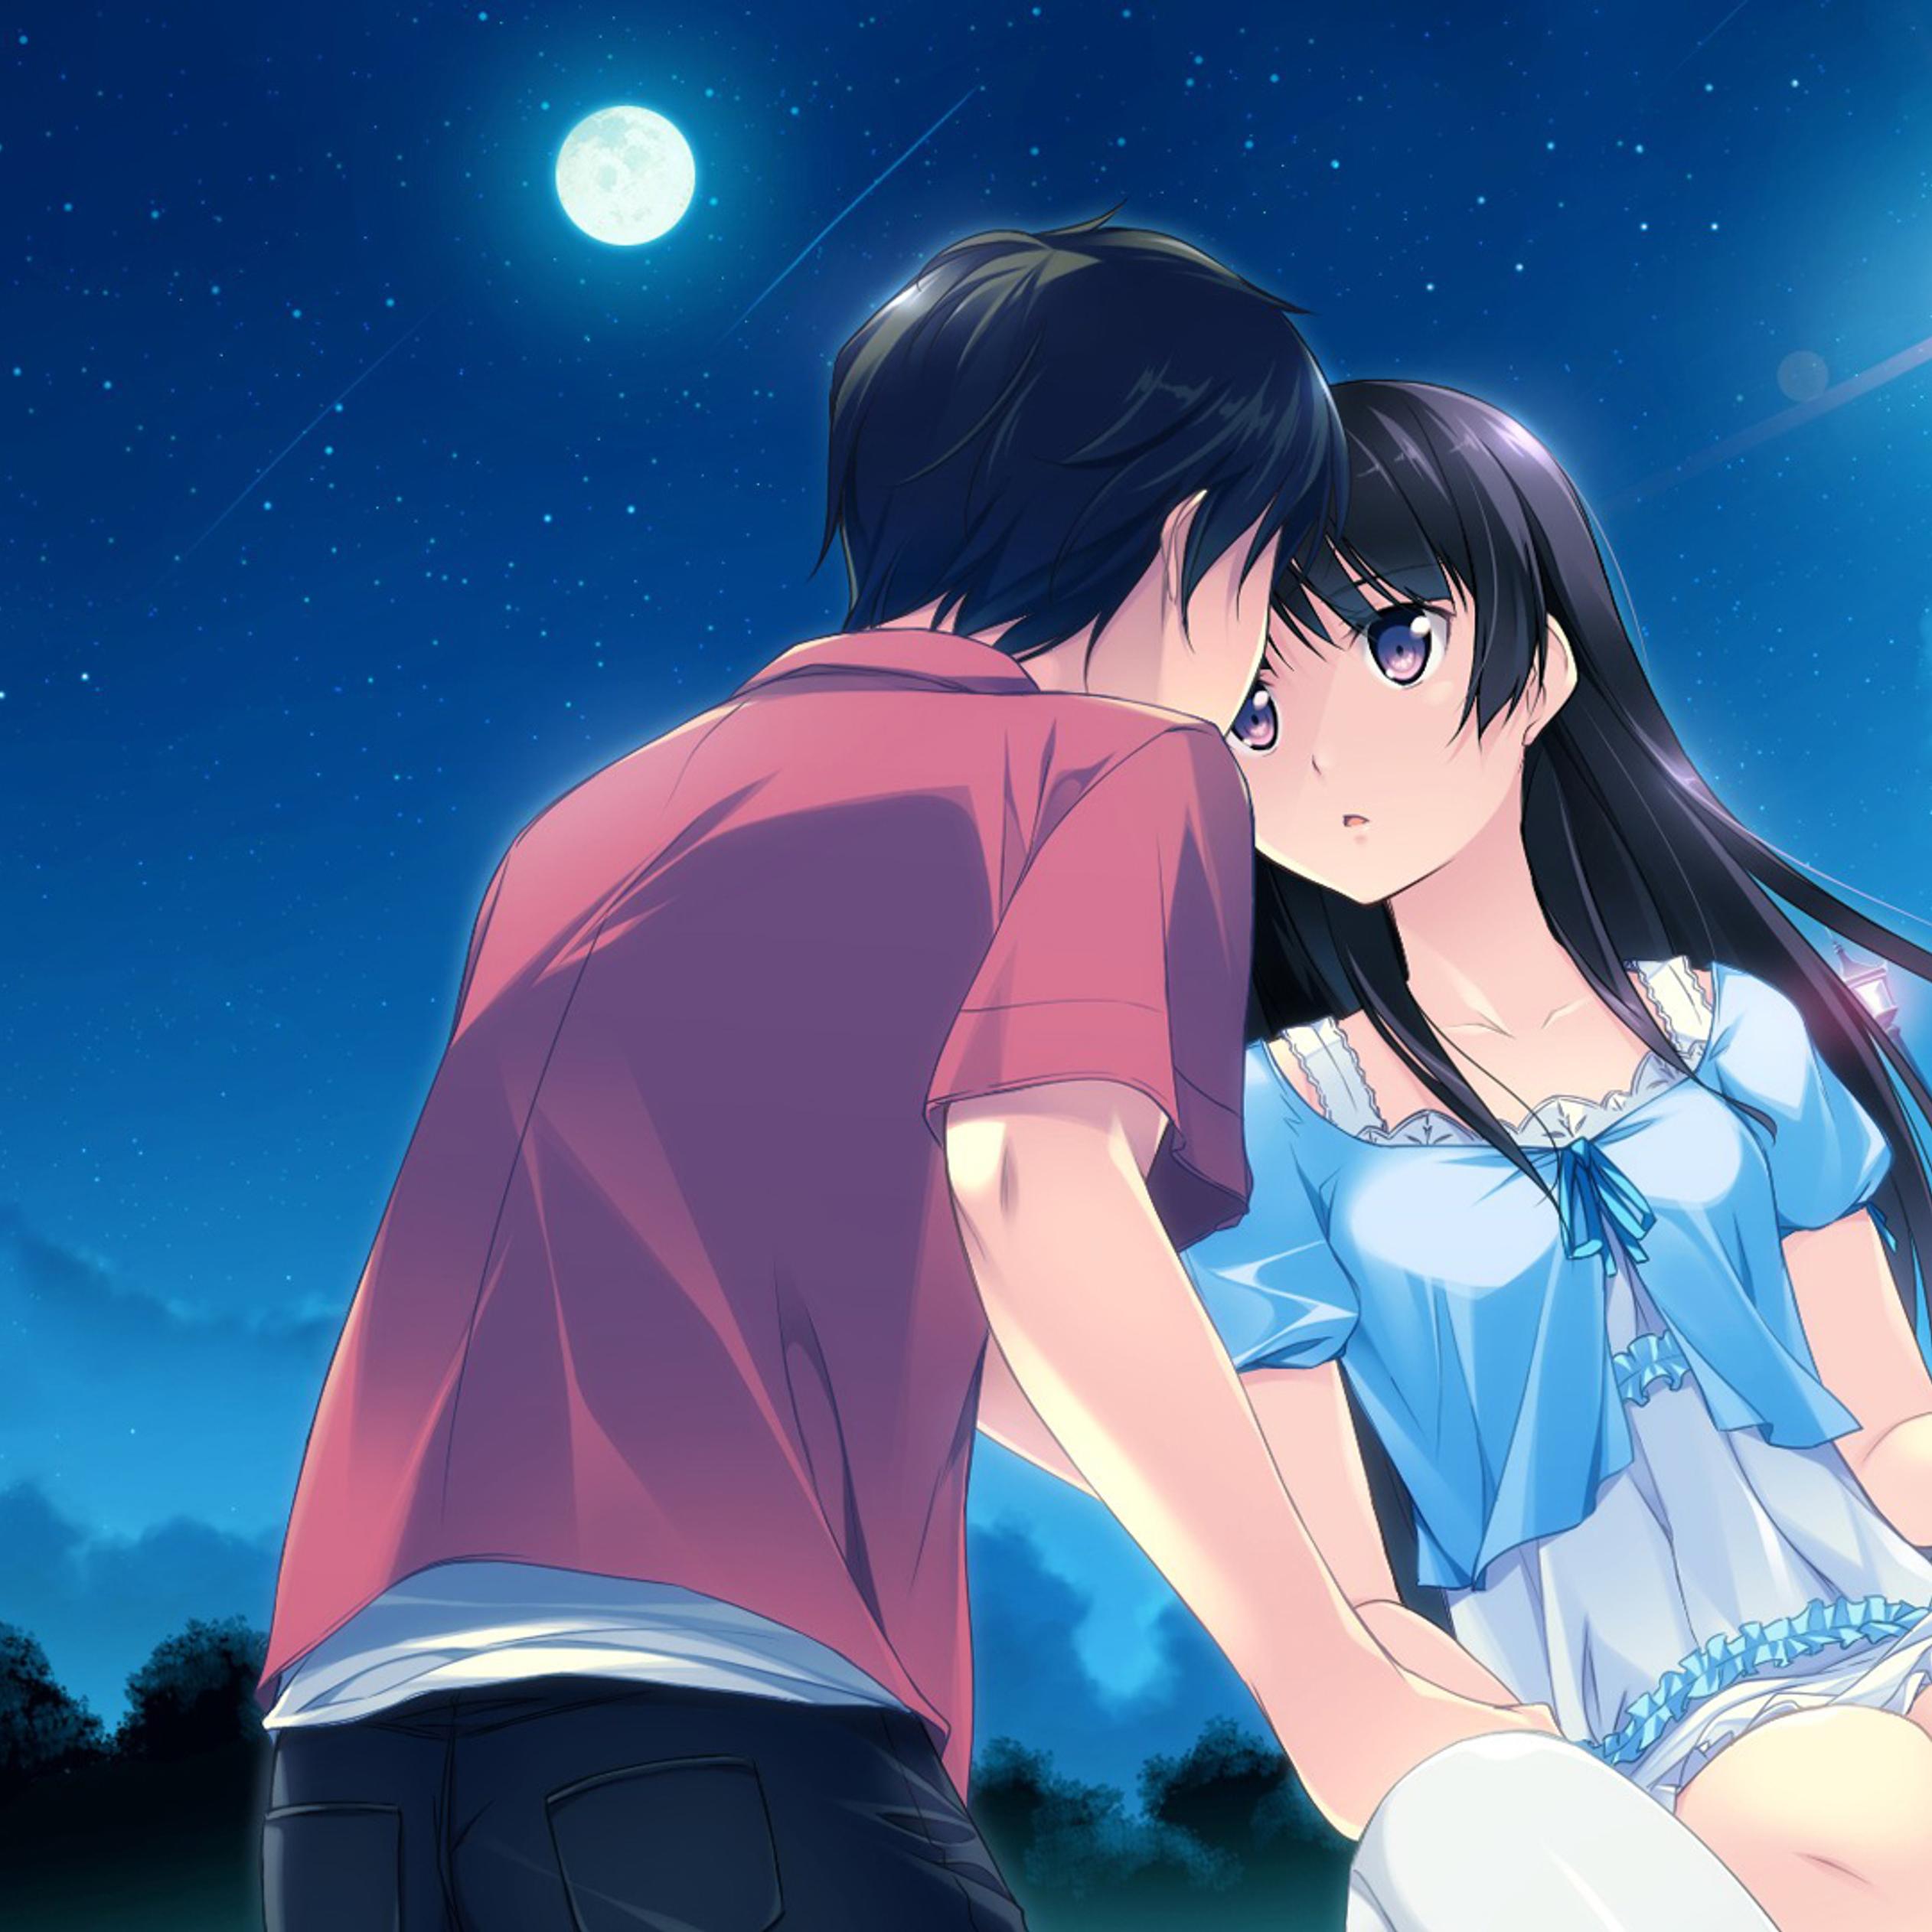 Anime couple during the night under the moonlight